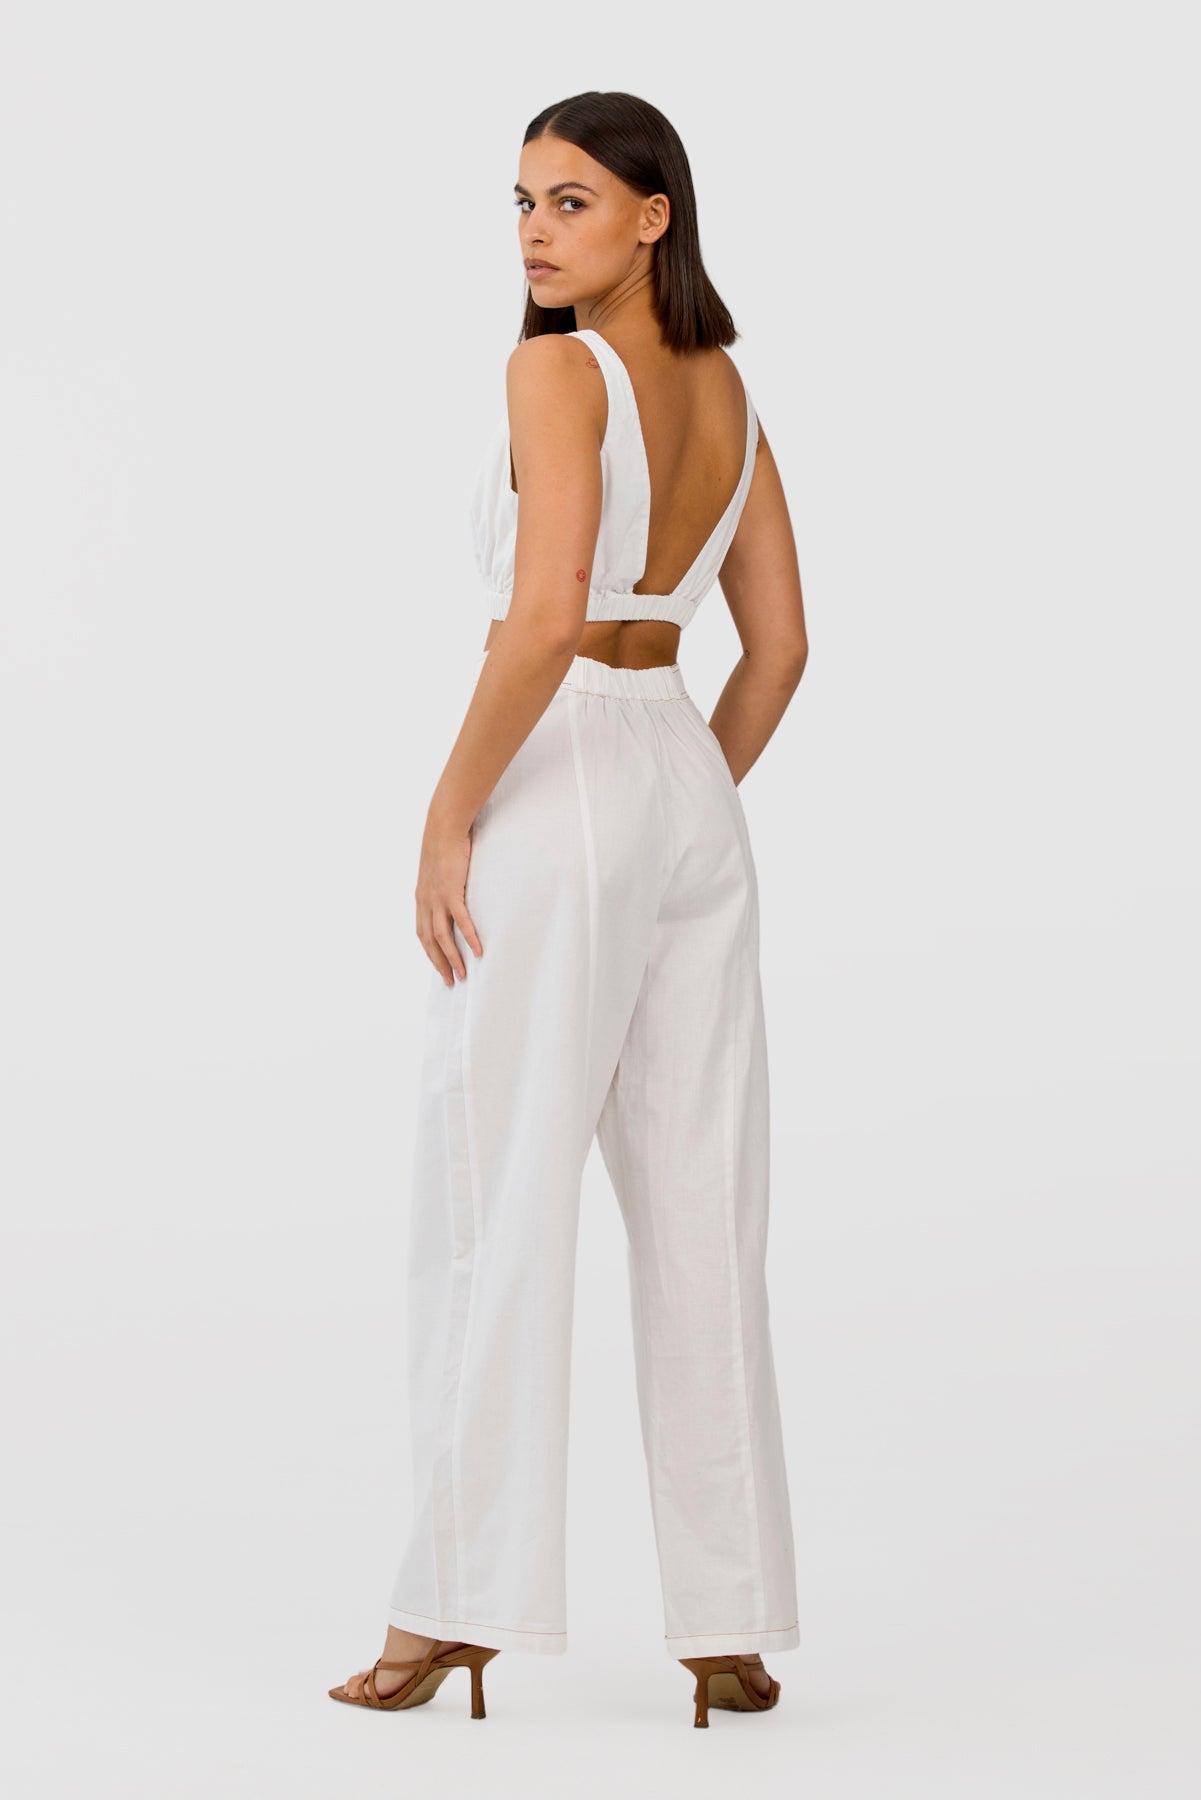 The Fifth Label - Tuscan Pant - Ivory